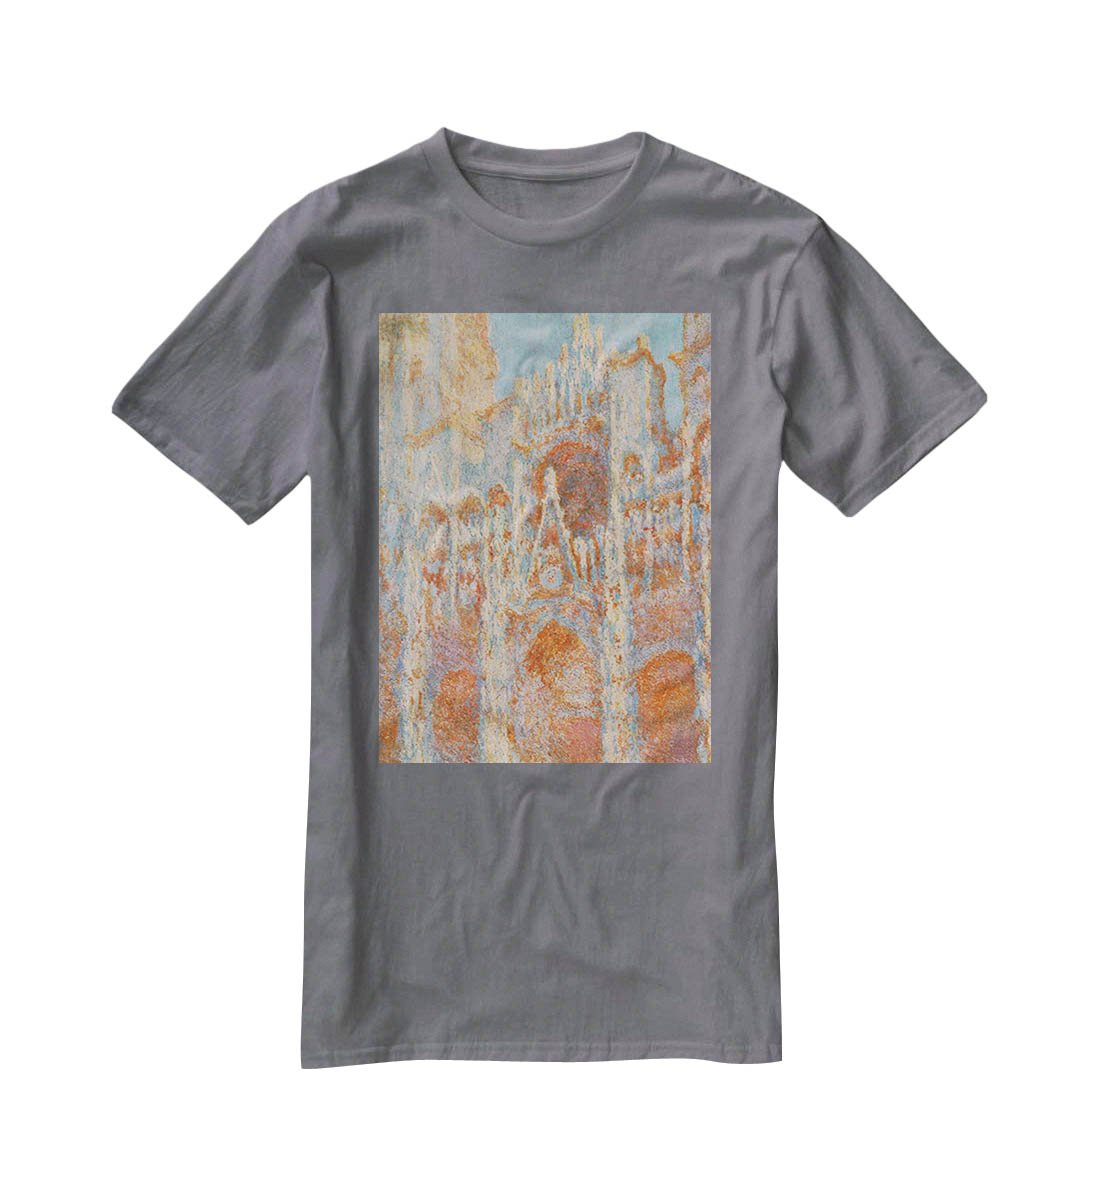 The Rouen Cathedral The facade at sunset by Monet T-Shirt - Canvas Art Rocks - 3